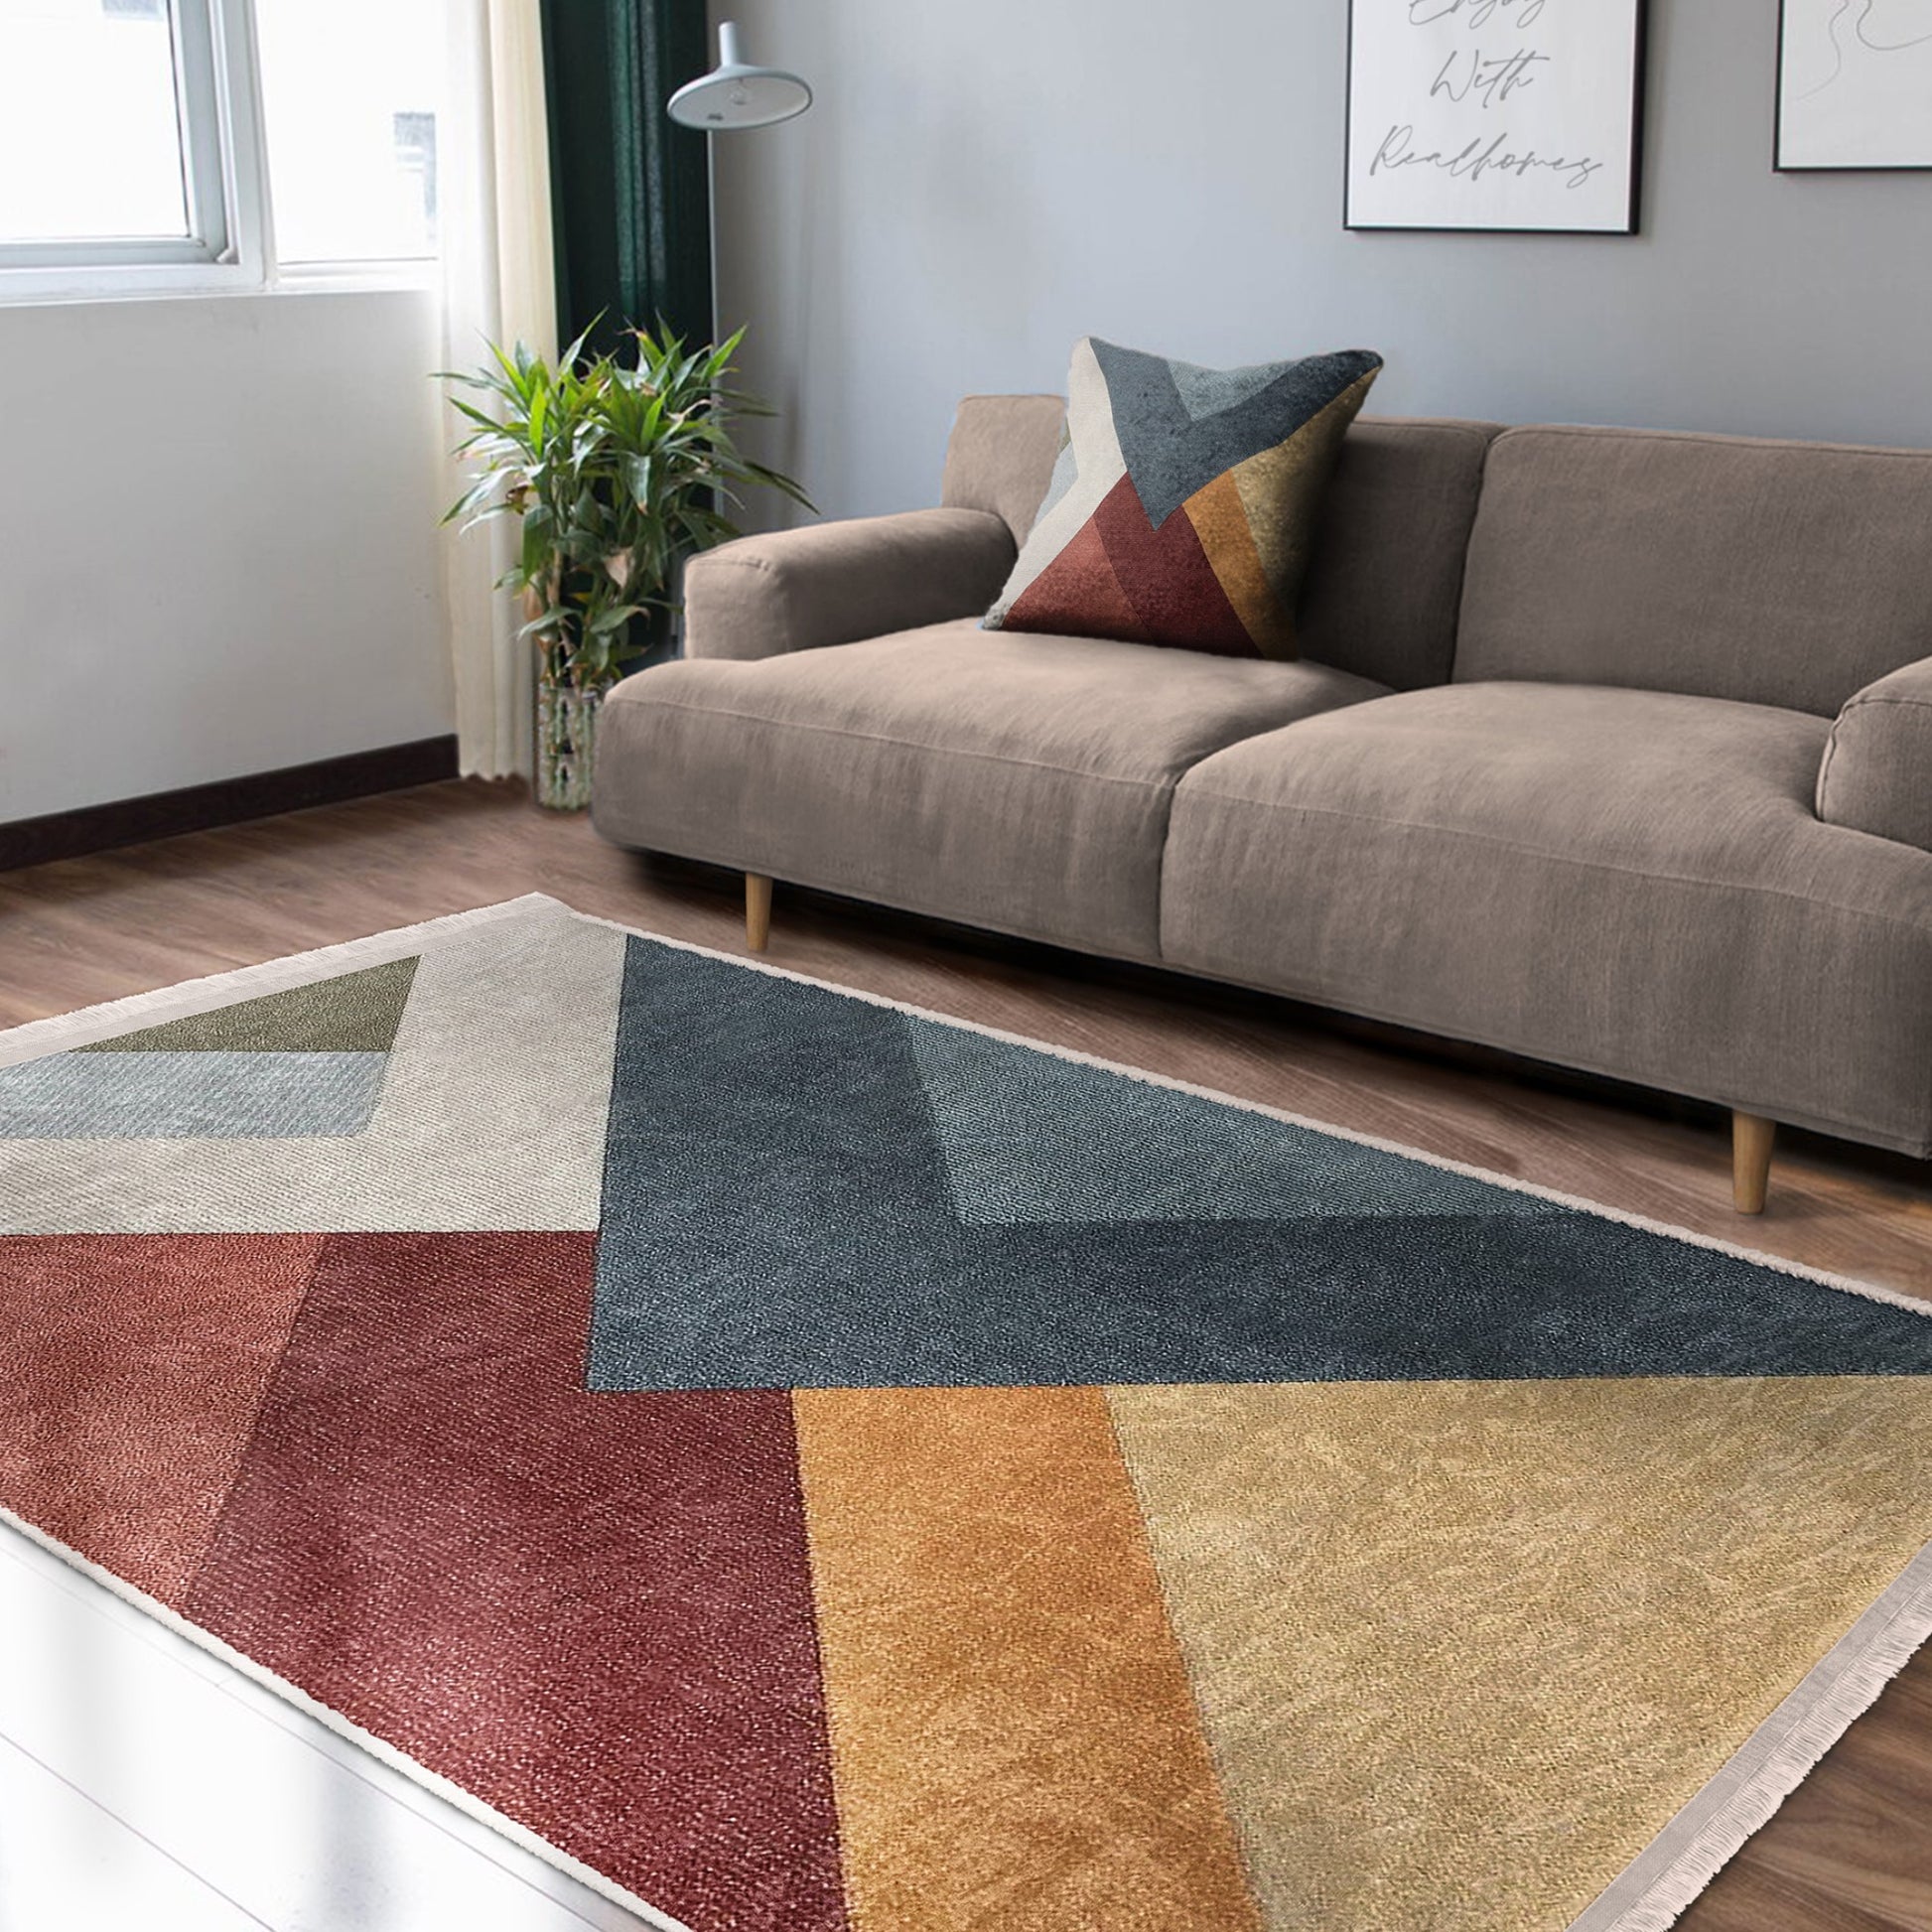 Modern Triangle Rug for a Trendy Living Space